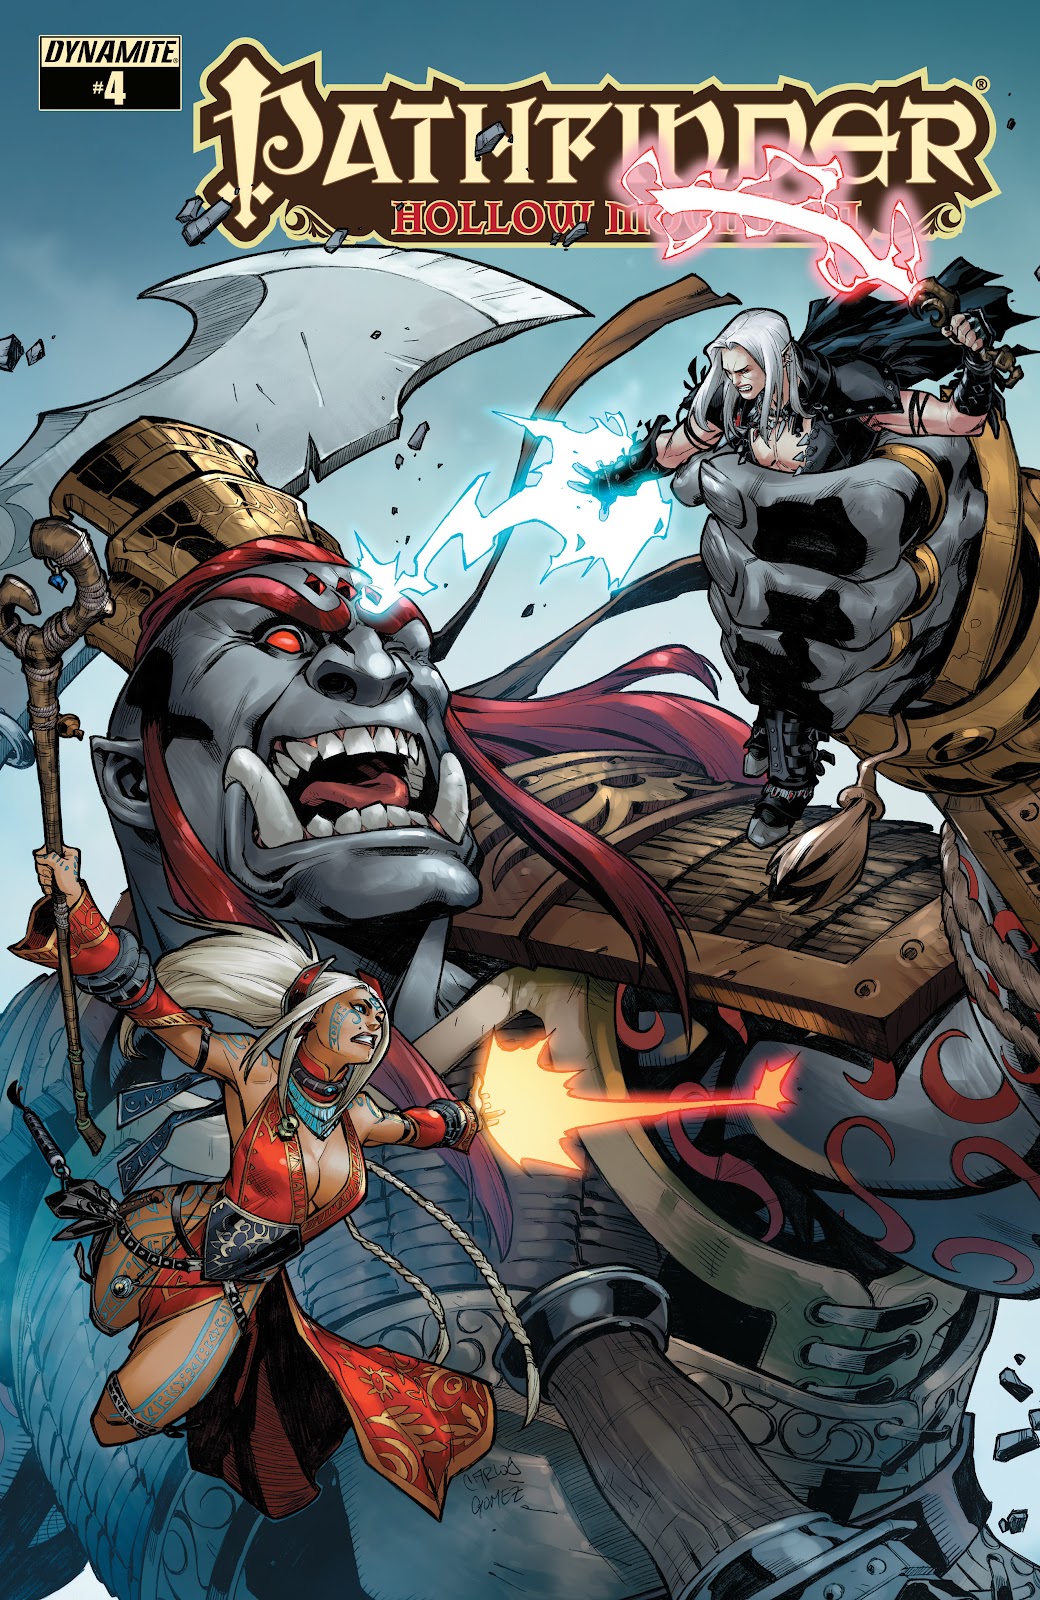 Pathfinder: Hollow Mountain issue 4 - Page 1